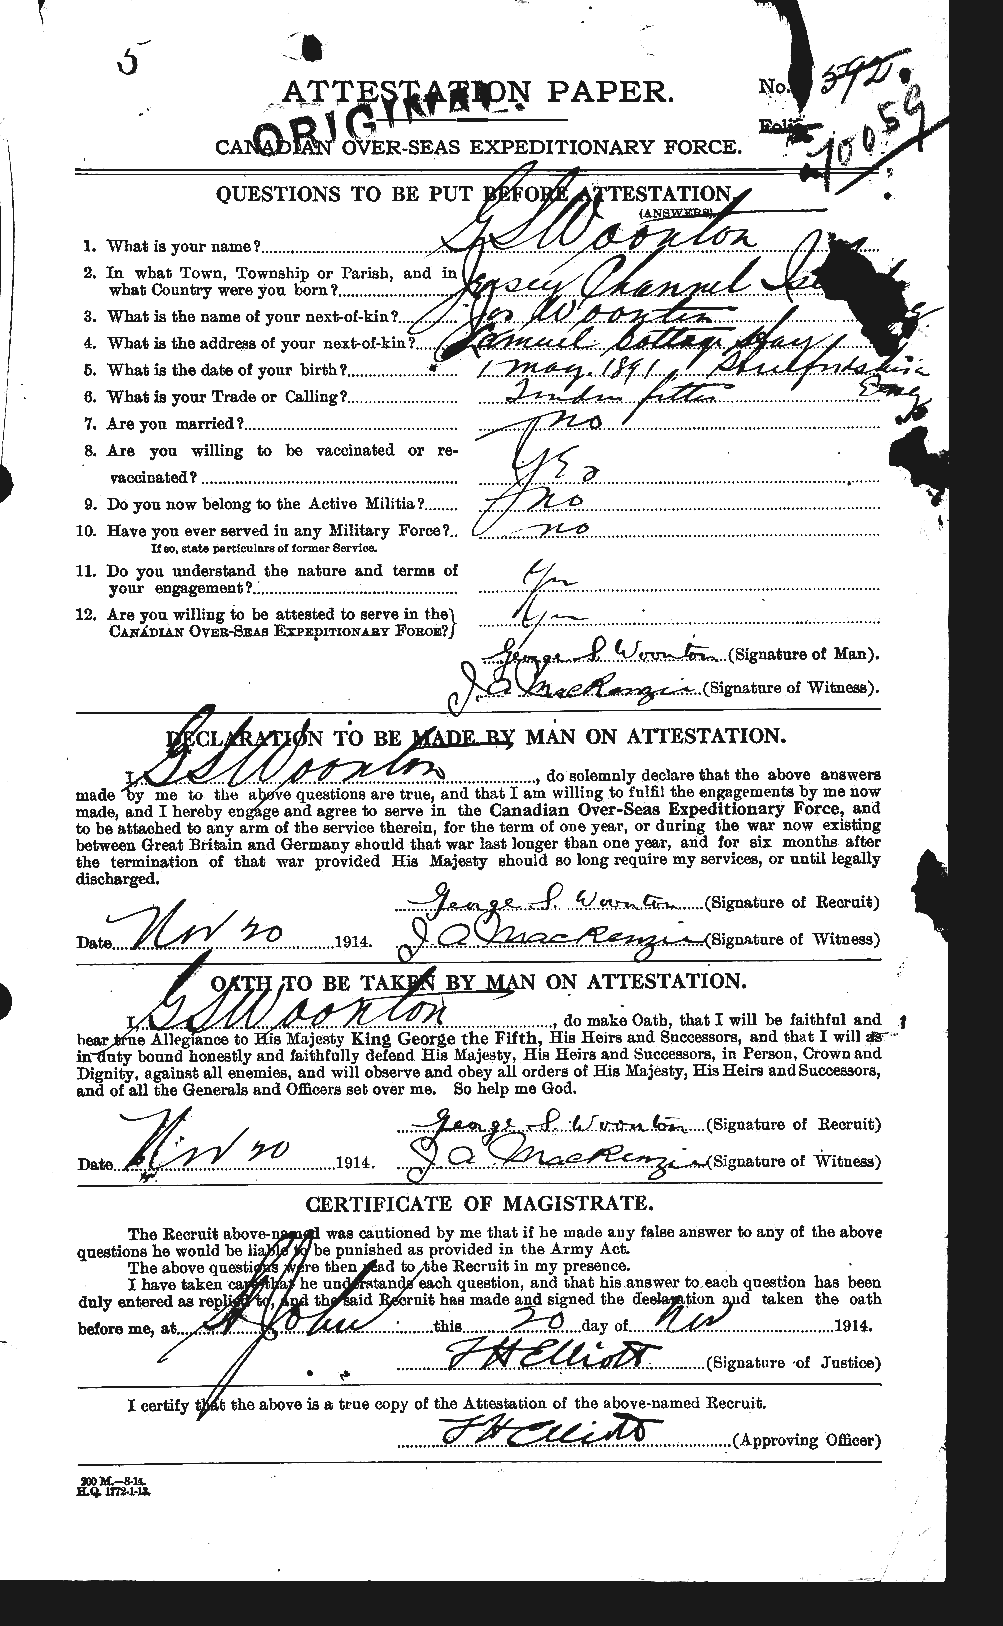 Personnel Records of the First World War - CEF 686063a